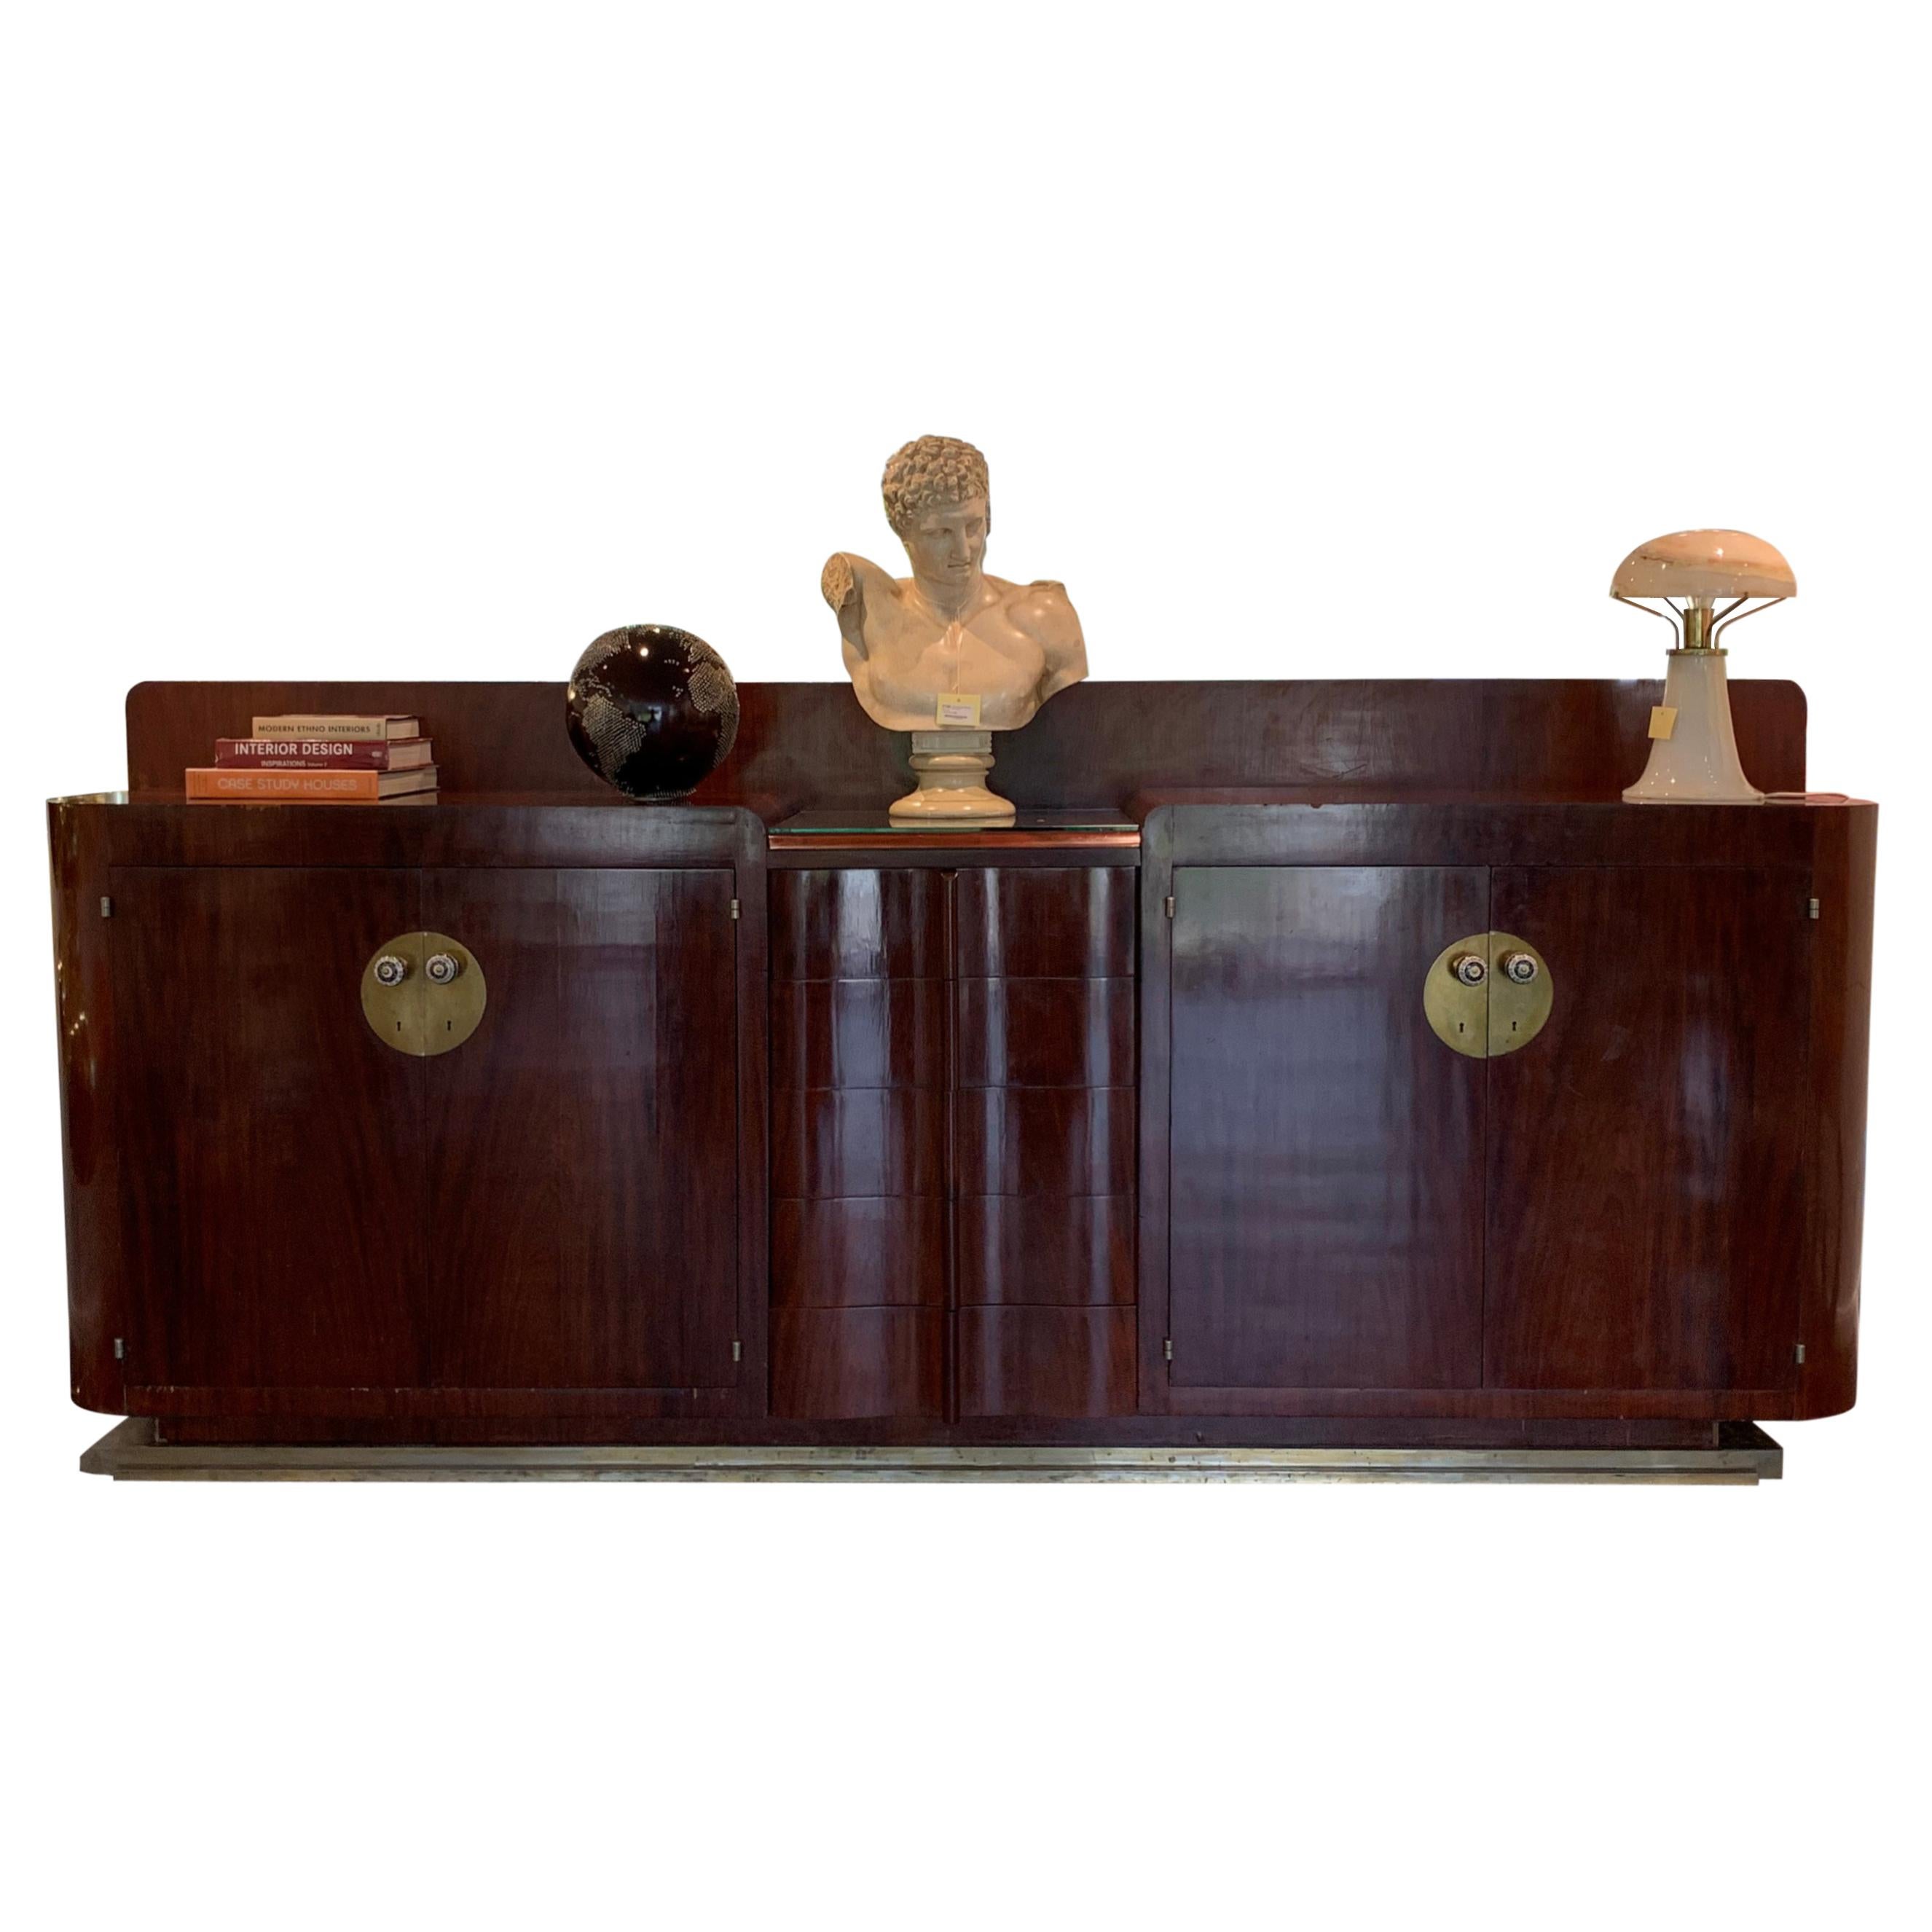 Large Art Deco Sideboard, Wood and Brass with Ceramic handles 